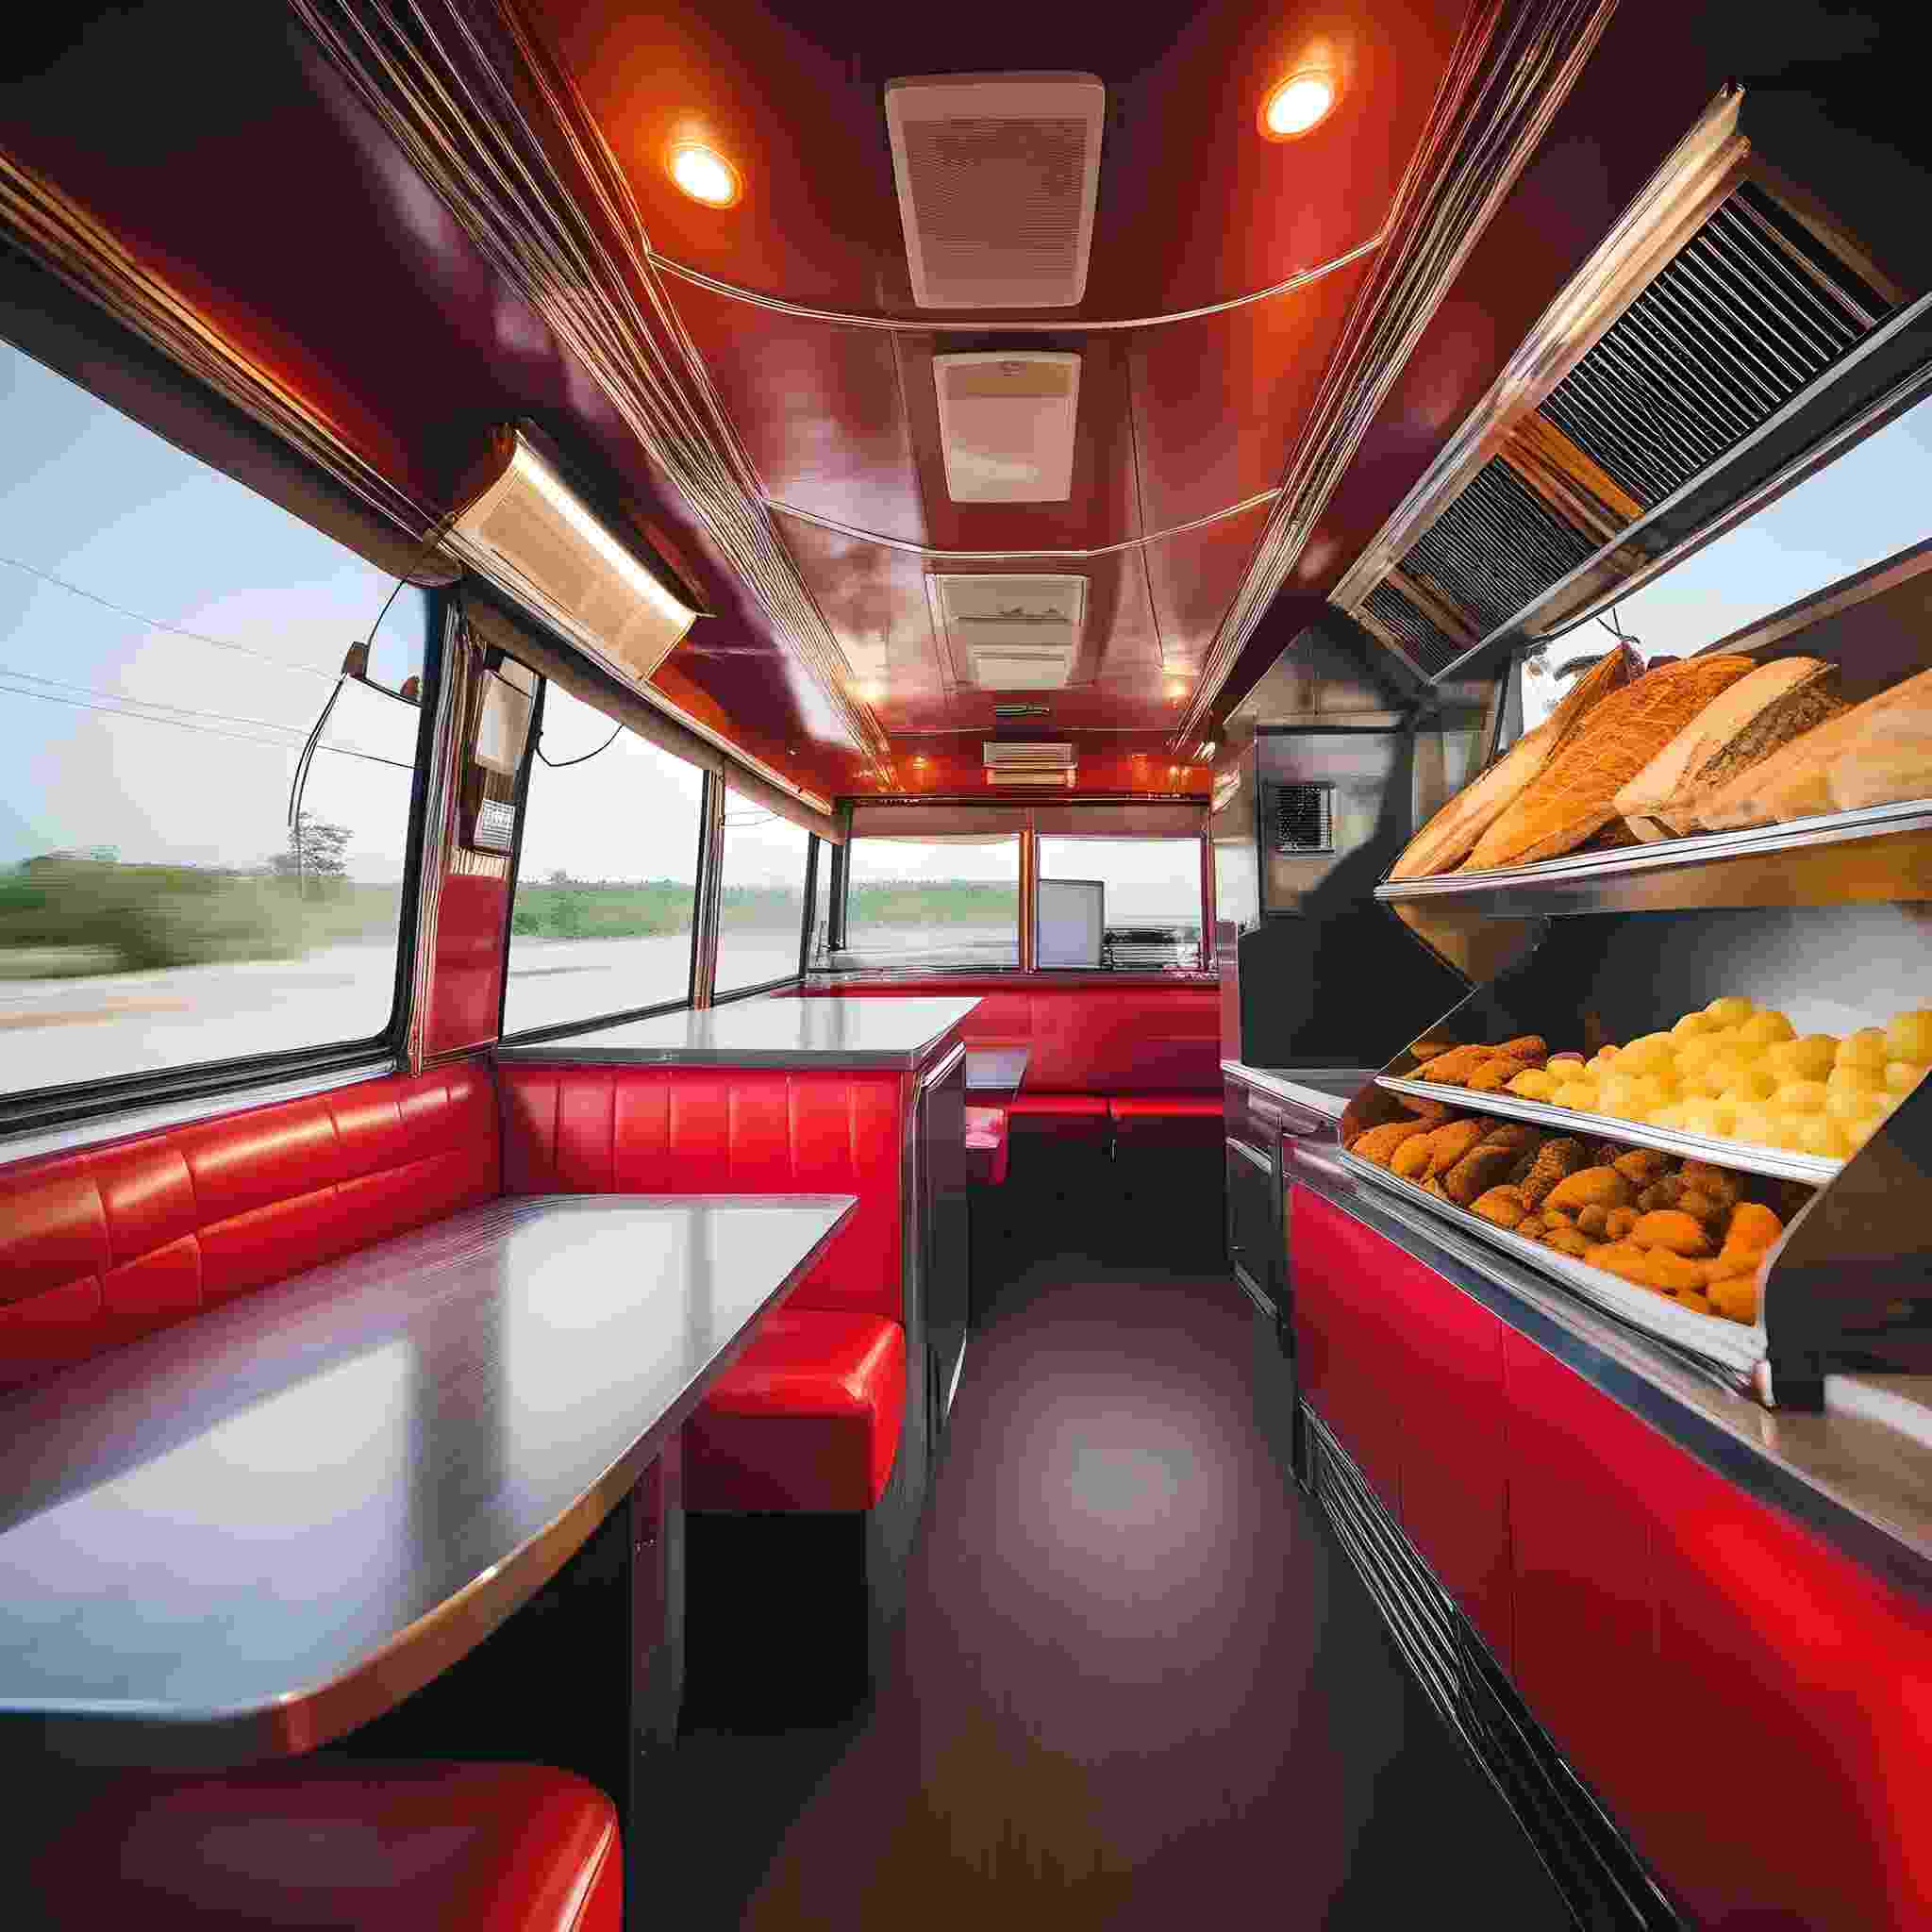 Chill on the Go: Choosing the Perfect Air Conditioner for Food Trailer's Comfort